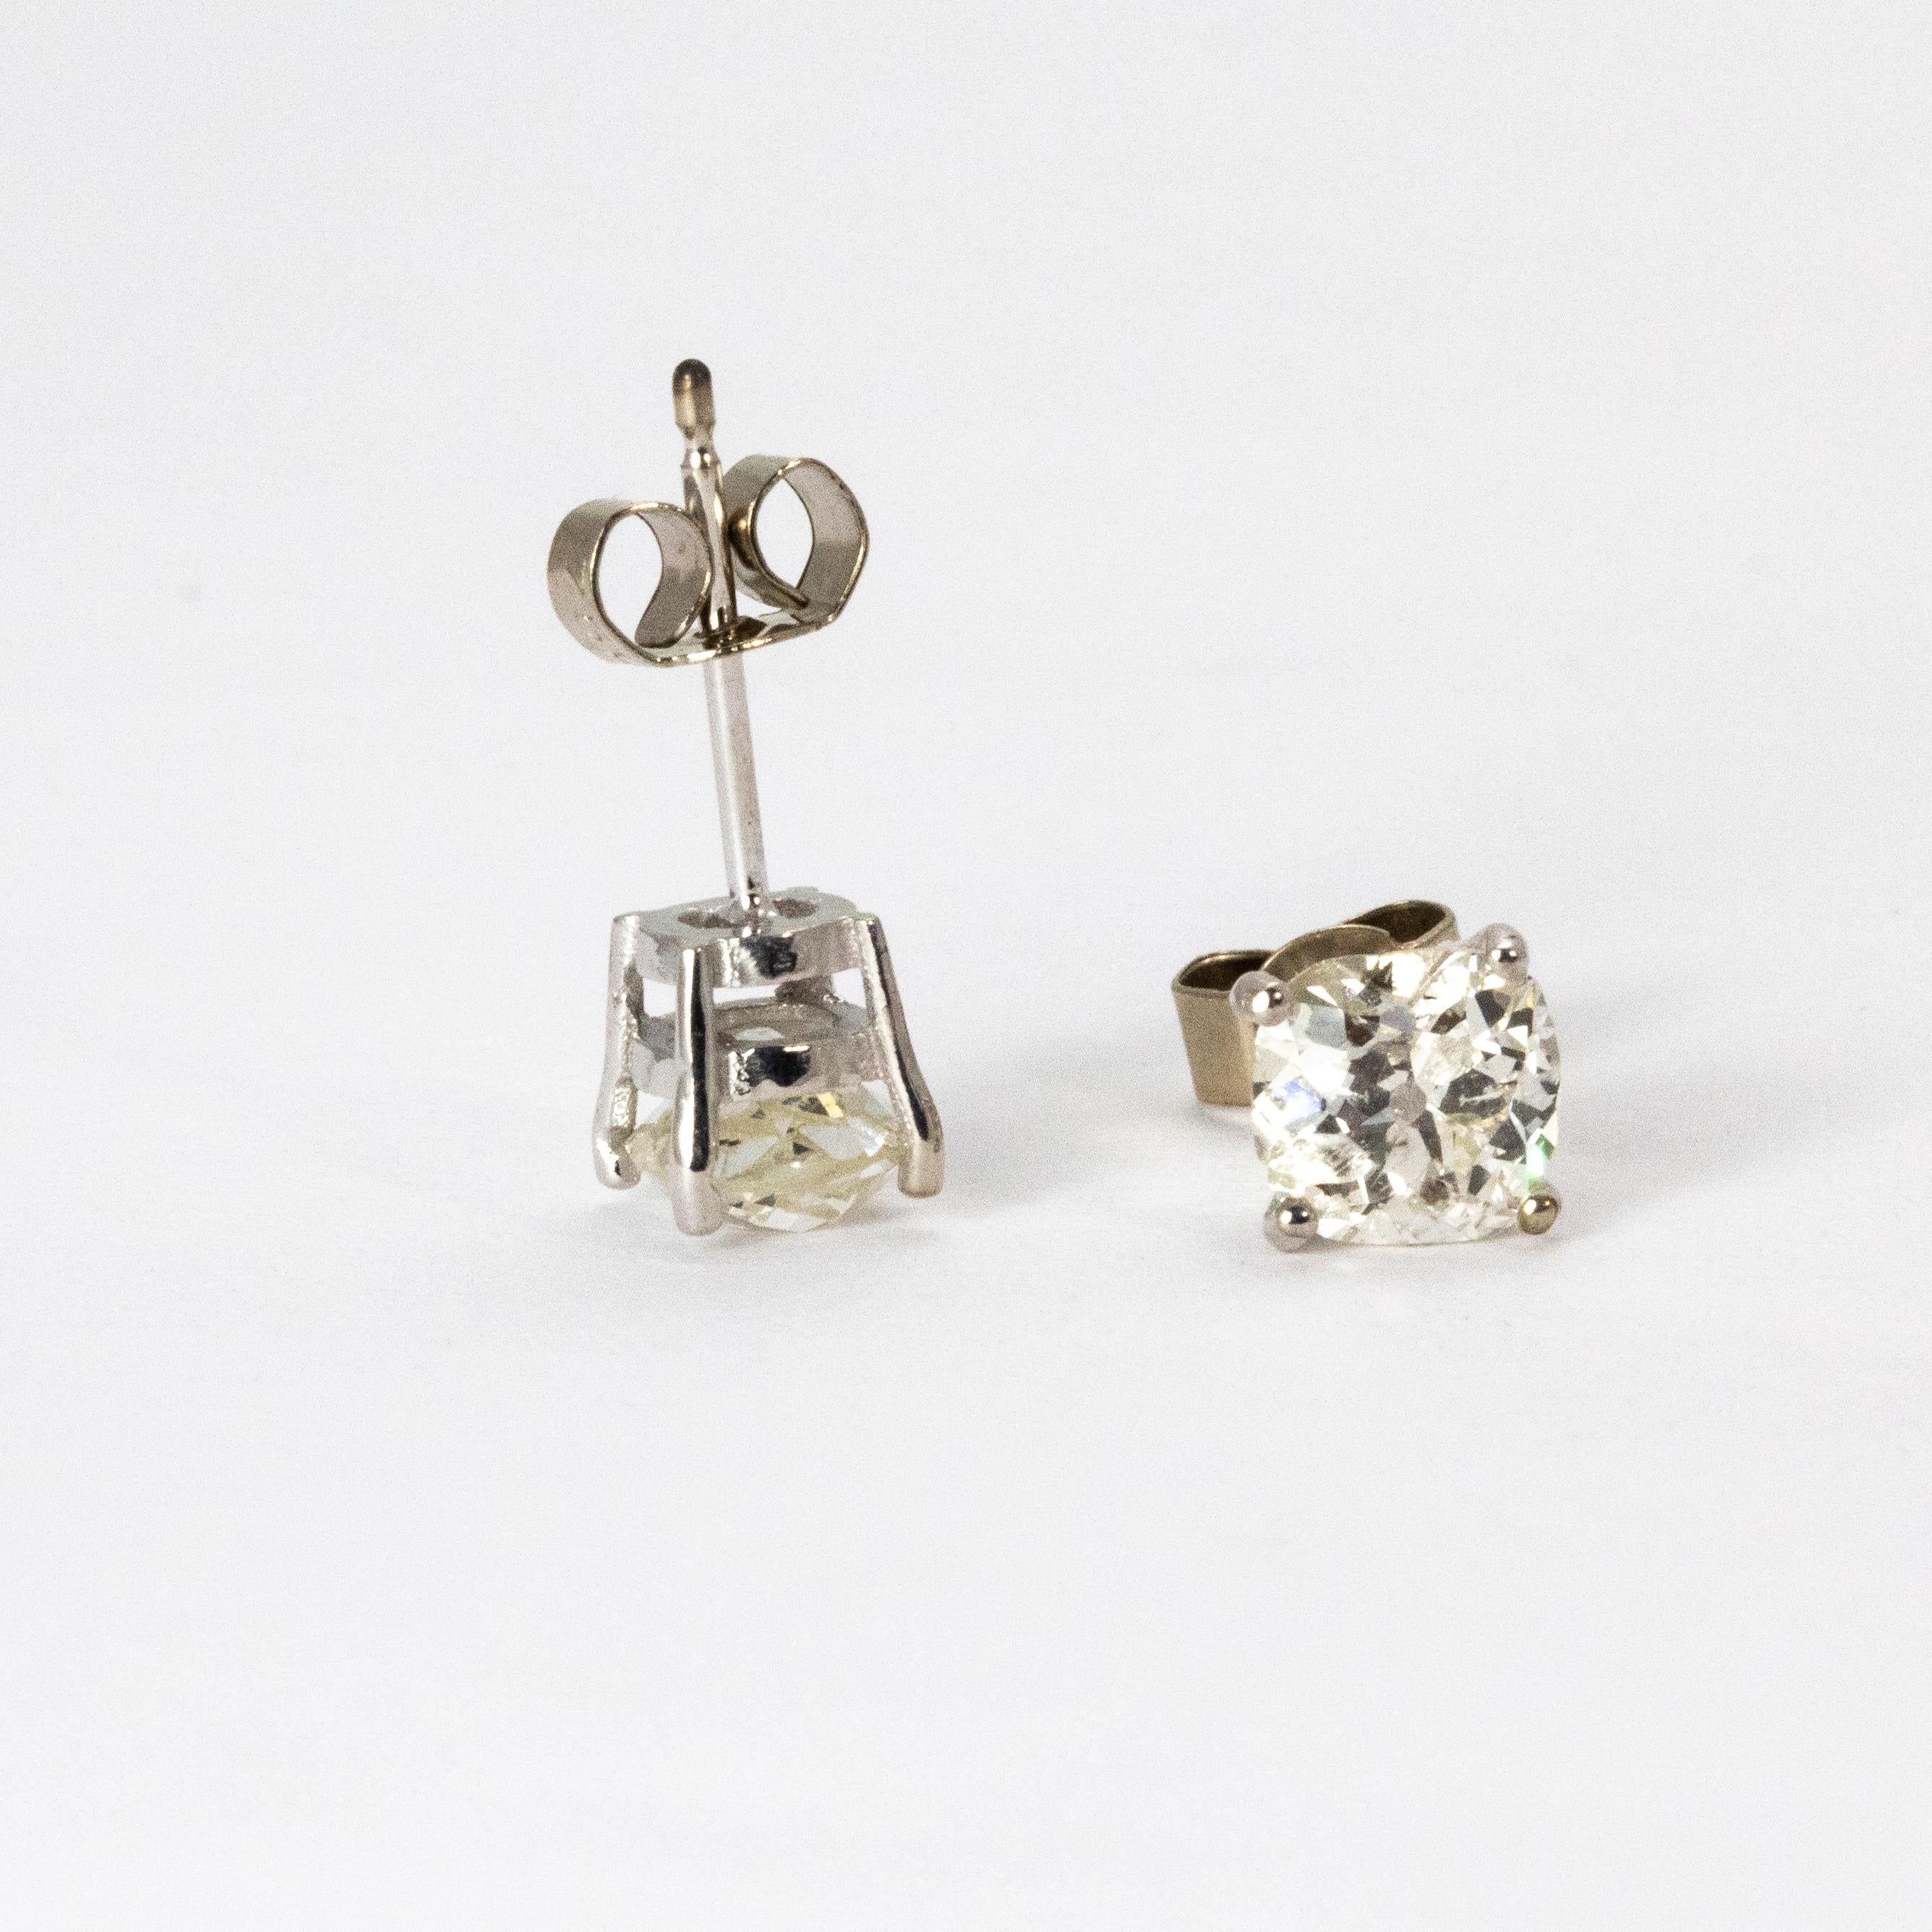 A classic pair of Art Deco diamond stud earrings. The earrings are set with a stunning white old European cut diamond weighing 95 points each, G colour and VS2 clarity. The stones are in a four claw setting and modelled throughout in 18 karat white